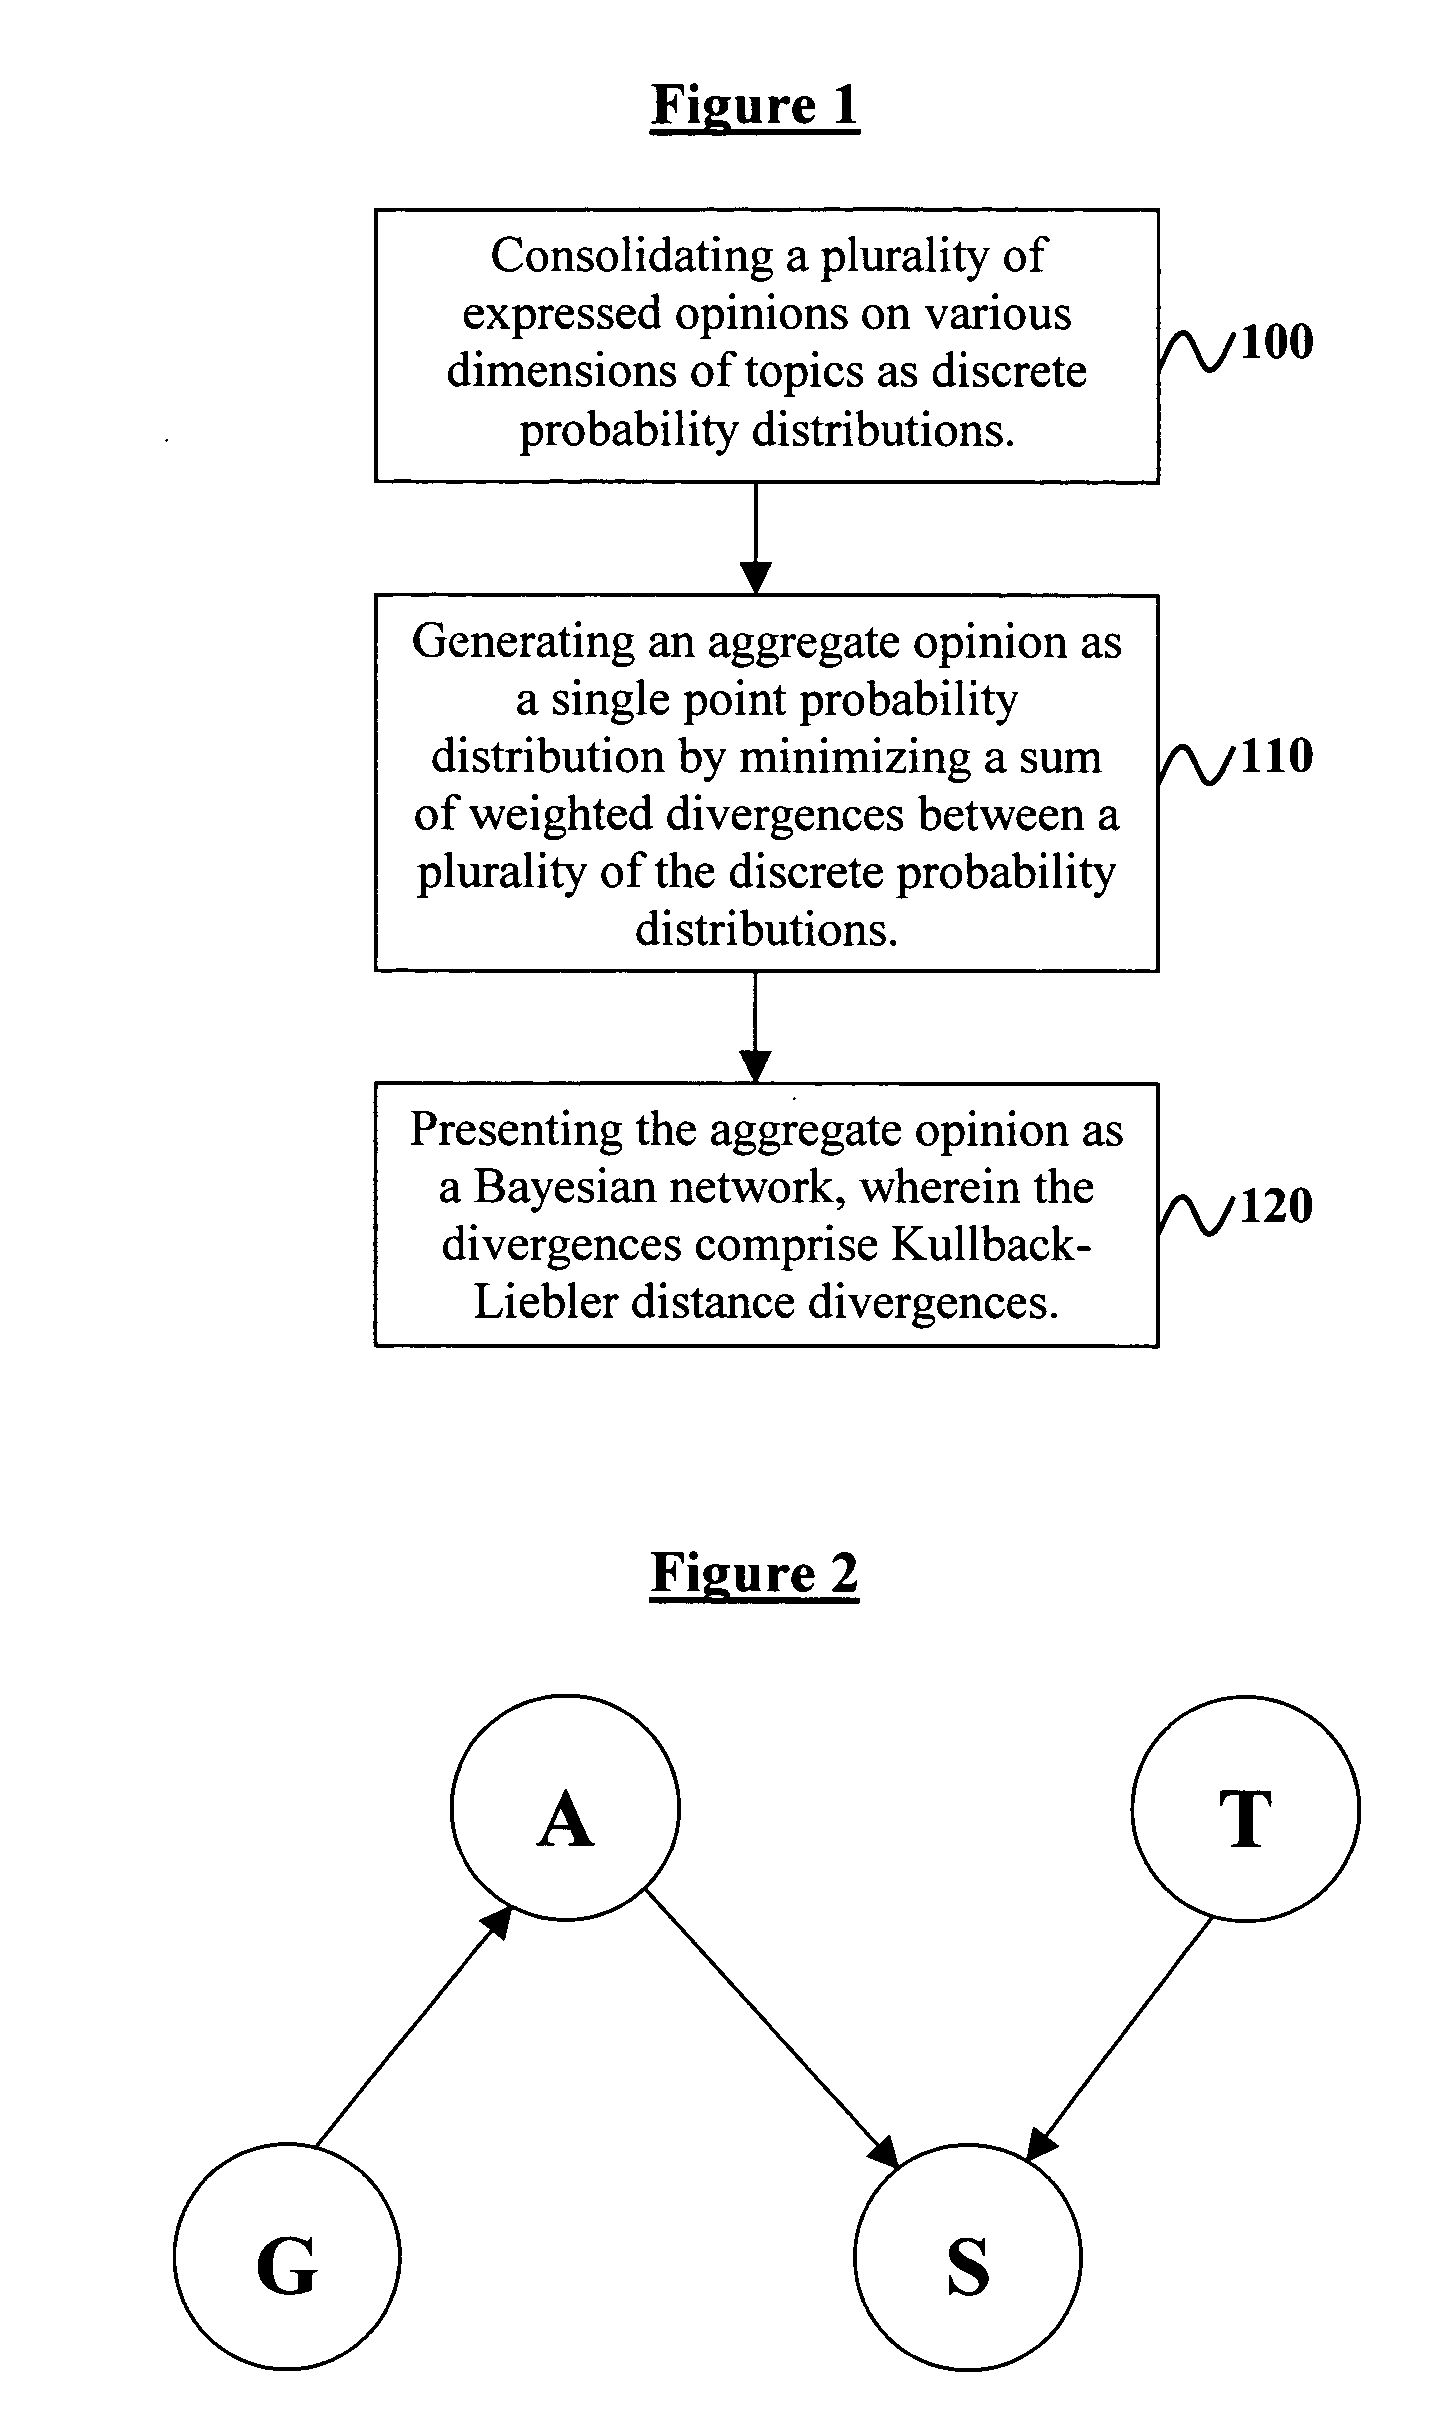 Method to hierarchical pooling of opinions from multiple sources